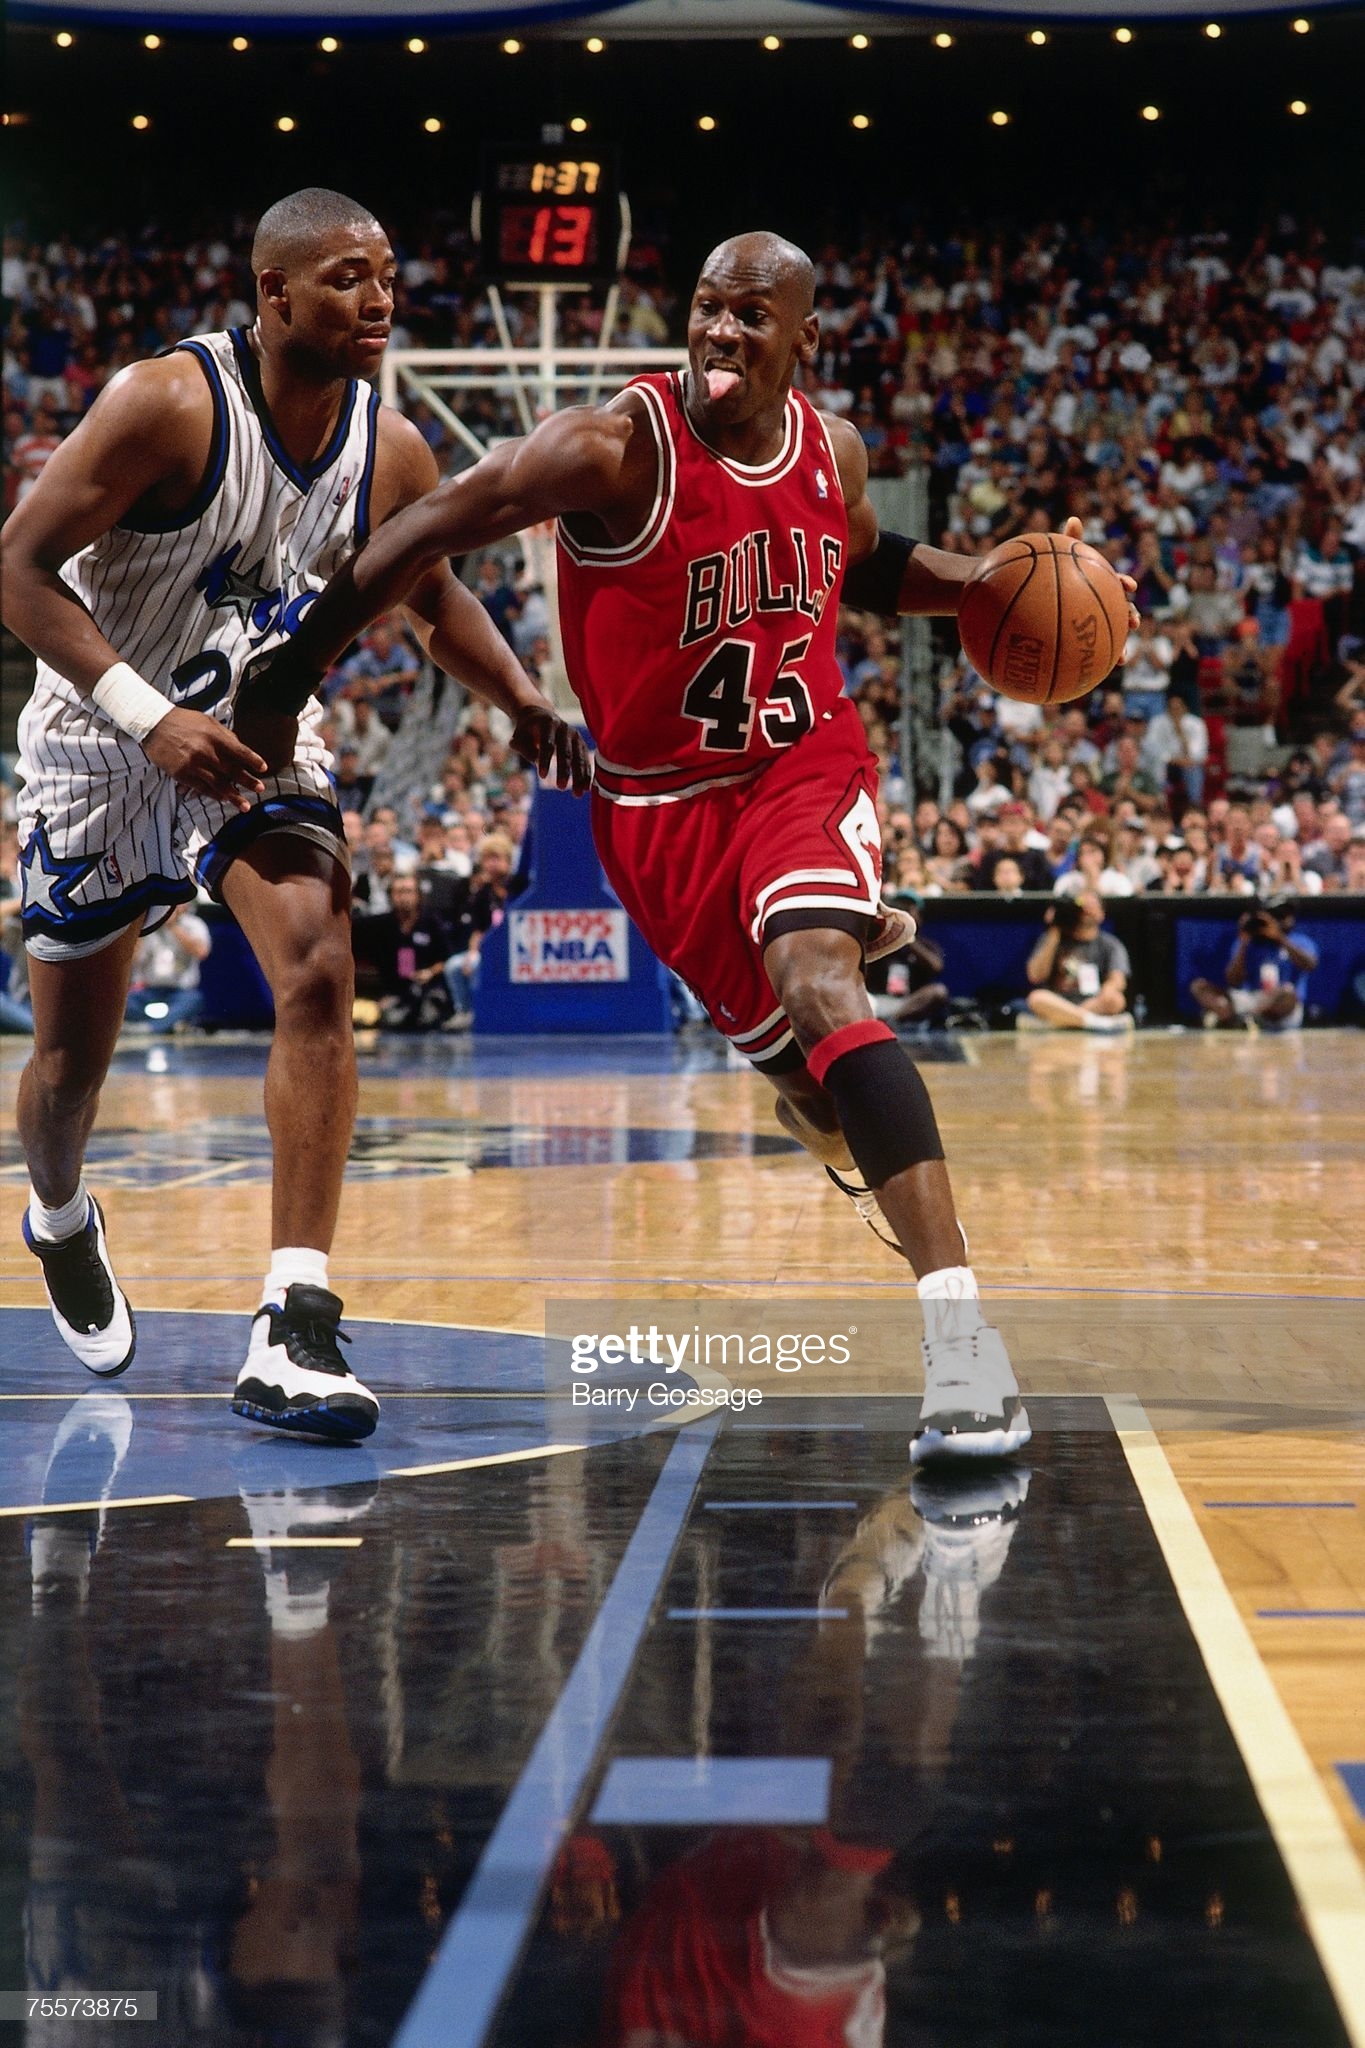 Nick Anderson wearing AJ10 'Orlandos' against the Bulls on 12/7/1995 from Barry Gossage/Getty